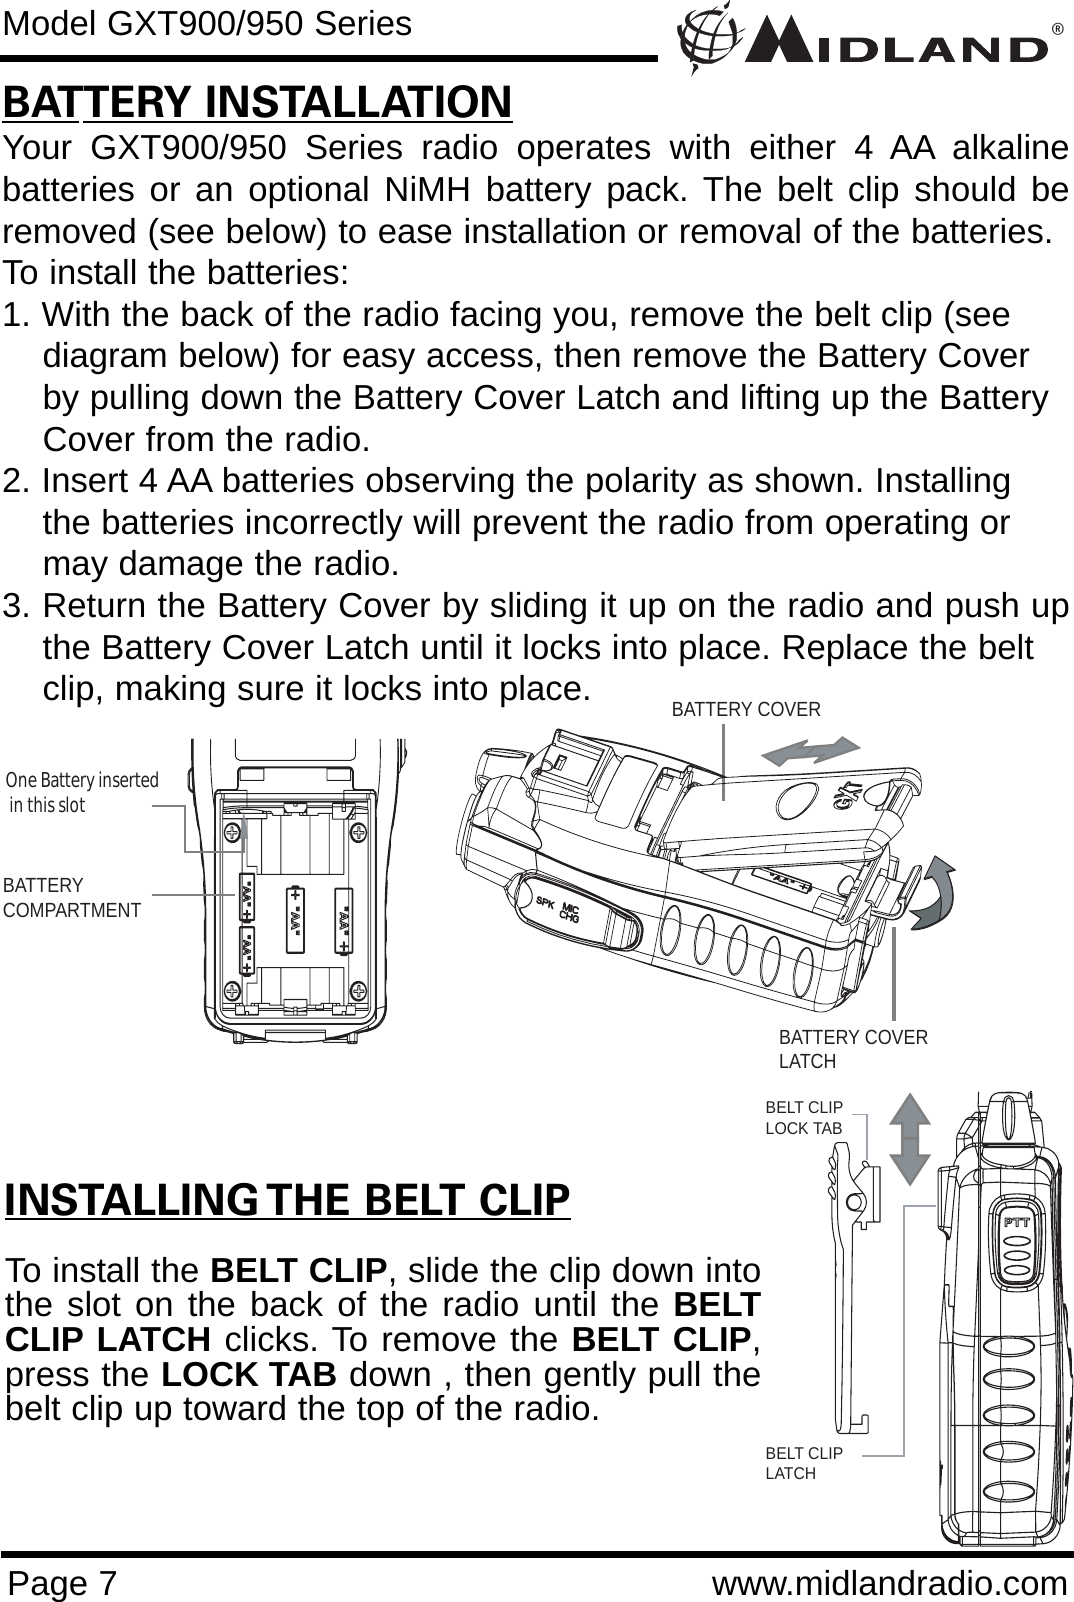 ®Page 7 www.midlandradio.comBATTERY INSTALLATIONYour GXT900/950 Series radio operates with either 4 AA alkalinebatteries or an optional NiMH battery pack. The belt clip should beremoved (see below) to ease installation or removal of the batteries. To install the batteries:1. With the back of the radio facing you, remove the belt clip (see    diagram below) for easy access, then remove the Battery Coverby pulling down the Battery Cover Latch and lifting up the Battery Cover from the radio.2. Insert 4 AA batteries observing the polarity as shown. Installingthe batteries incorrectly will prevent the radio from operating ormay damage the radio.3. Return the Battery Cover by sliding it up on the radio and push upthe Battery Cover Latch until it locks into place. Replace the belt clip, making sure it locks into place.Model GXT900/950 SeriesINSTALLING THE BELT CLIPTo install the BELT CLIP, slide the clip down intothe slot on the back of the radio until the BELTCLIP LATCH clicks. To remove the BELT CLIP,press the LOCK TAB down , then gently pull thebelt clip up toward the top of the radio.BATTERYCOMPARTMENTOne Battery inserted  in this slotBATTERY COVERBATTERY COVERLATCHBELT CLIPLOCK TABBELT CLIP LATCH